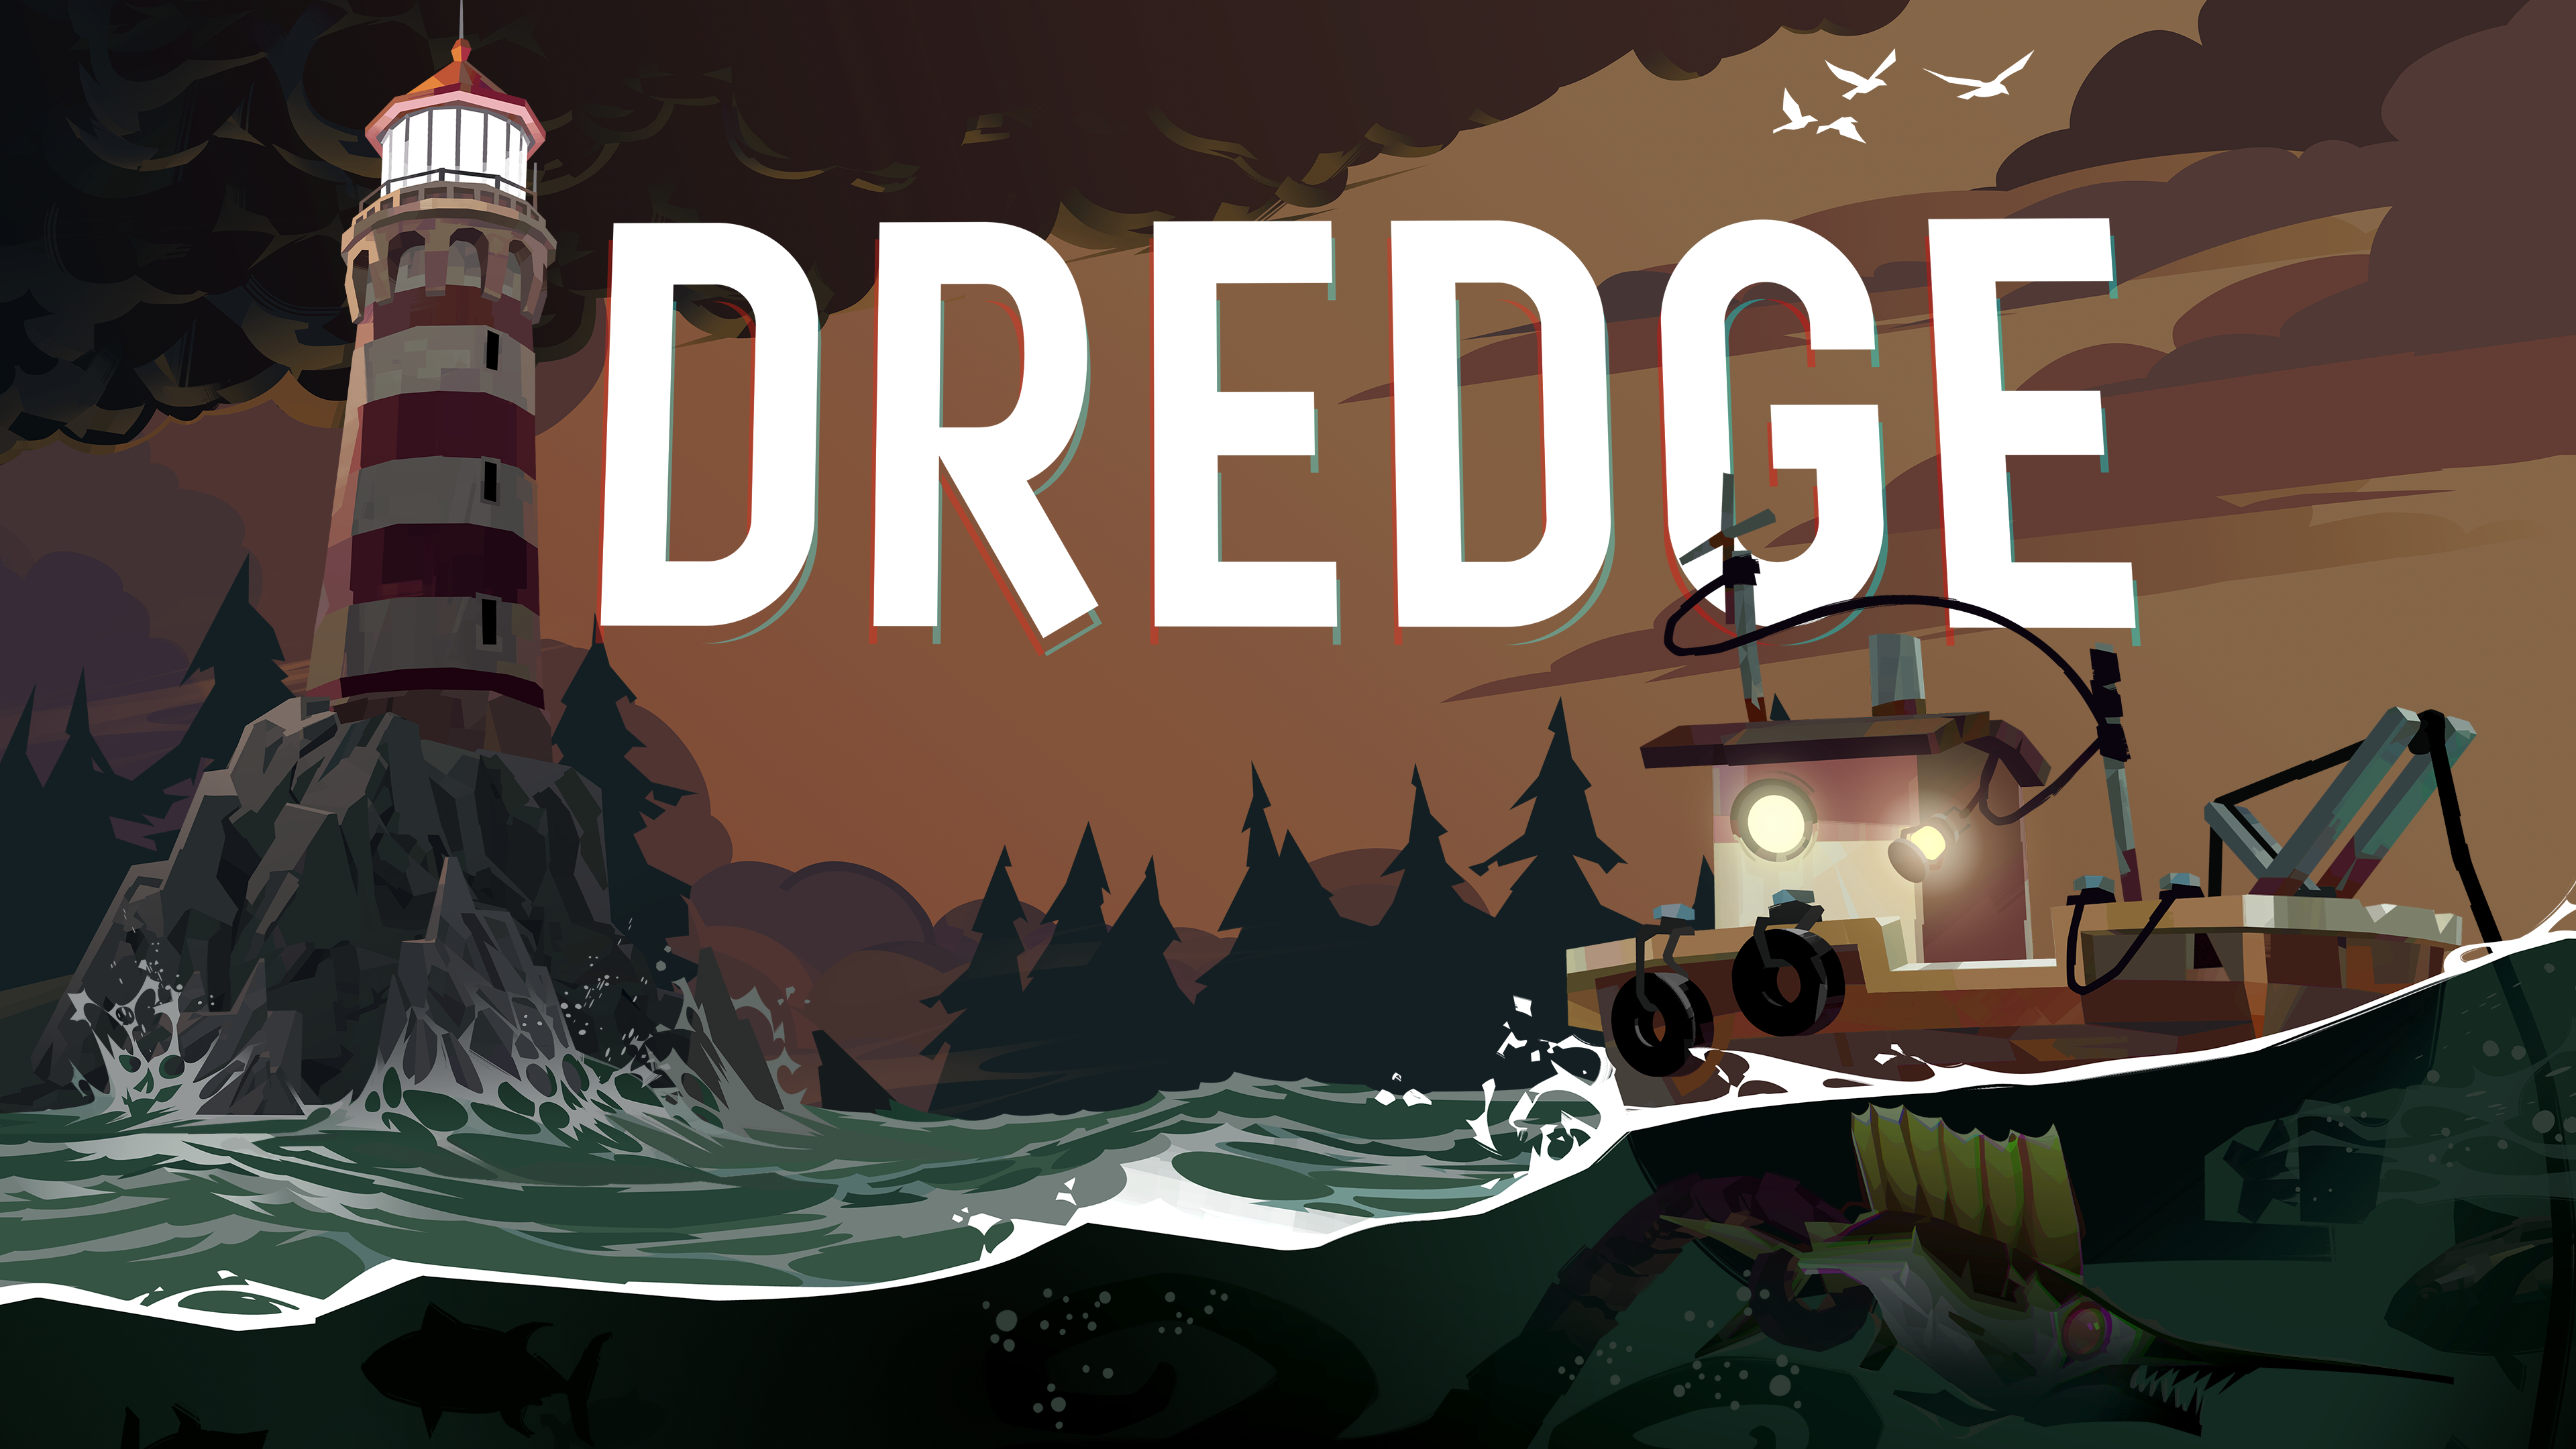 You can now try fishing game Dredge before you buy with this new Switch demo - Eurogamer.net (Picture 1)